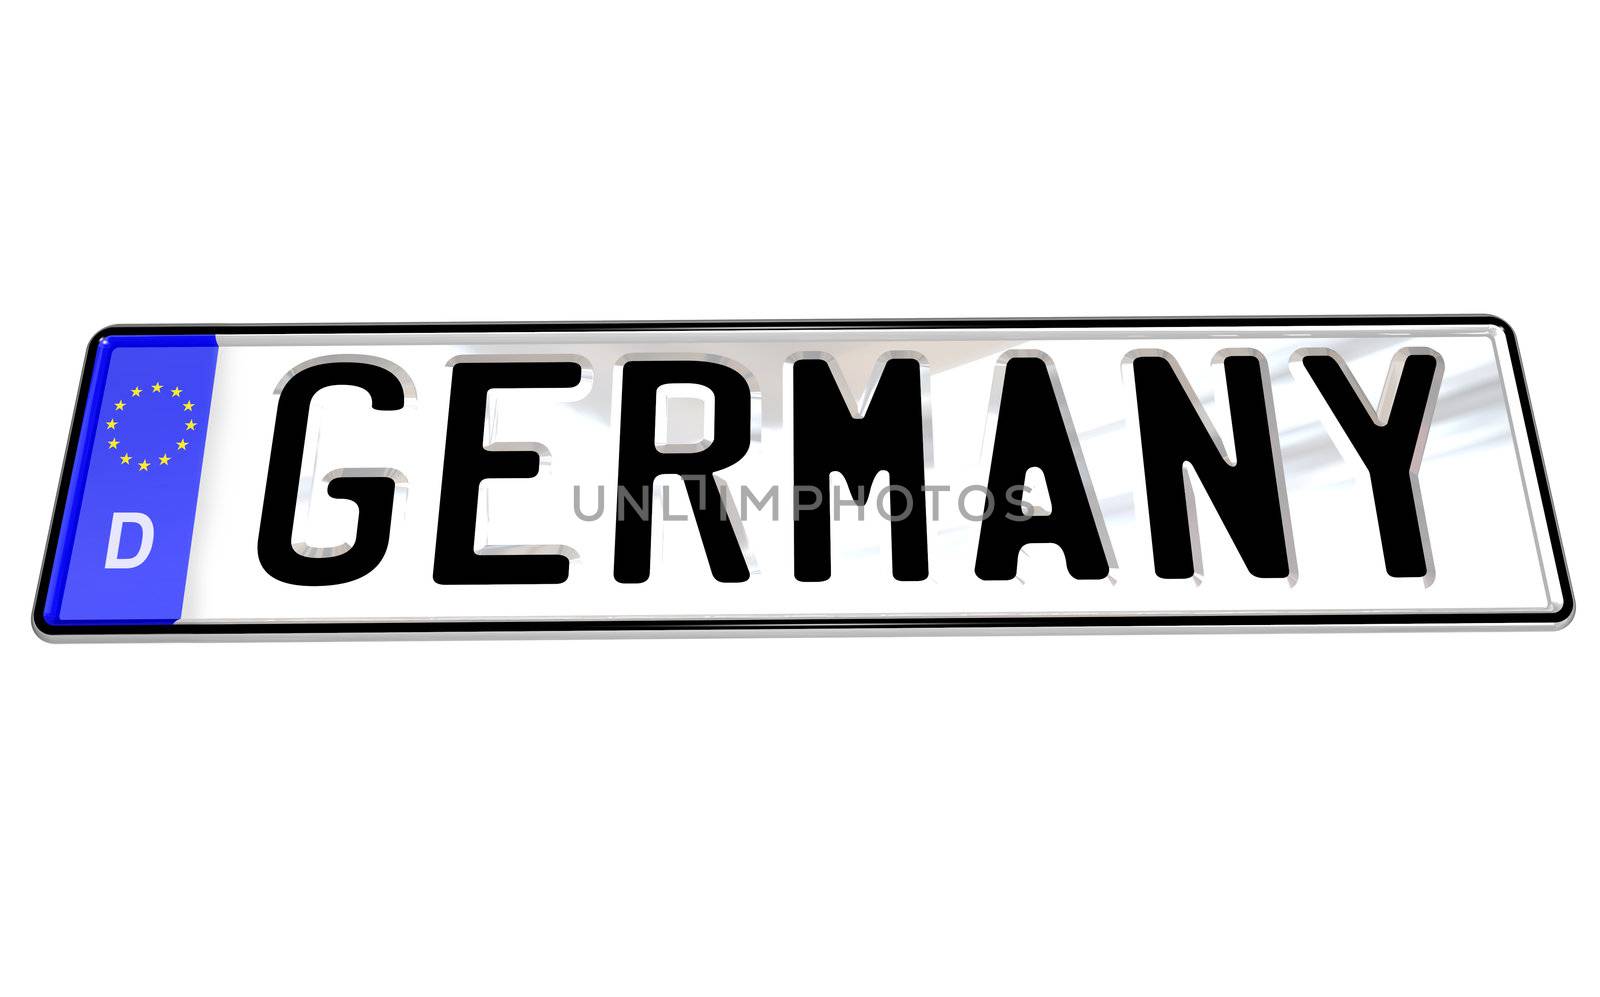 The word Germany appears on a white license plate following the format of the German automotive license plate